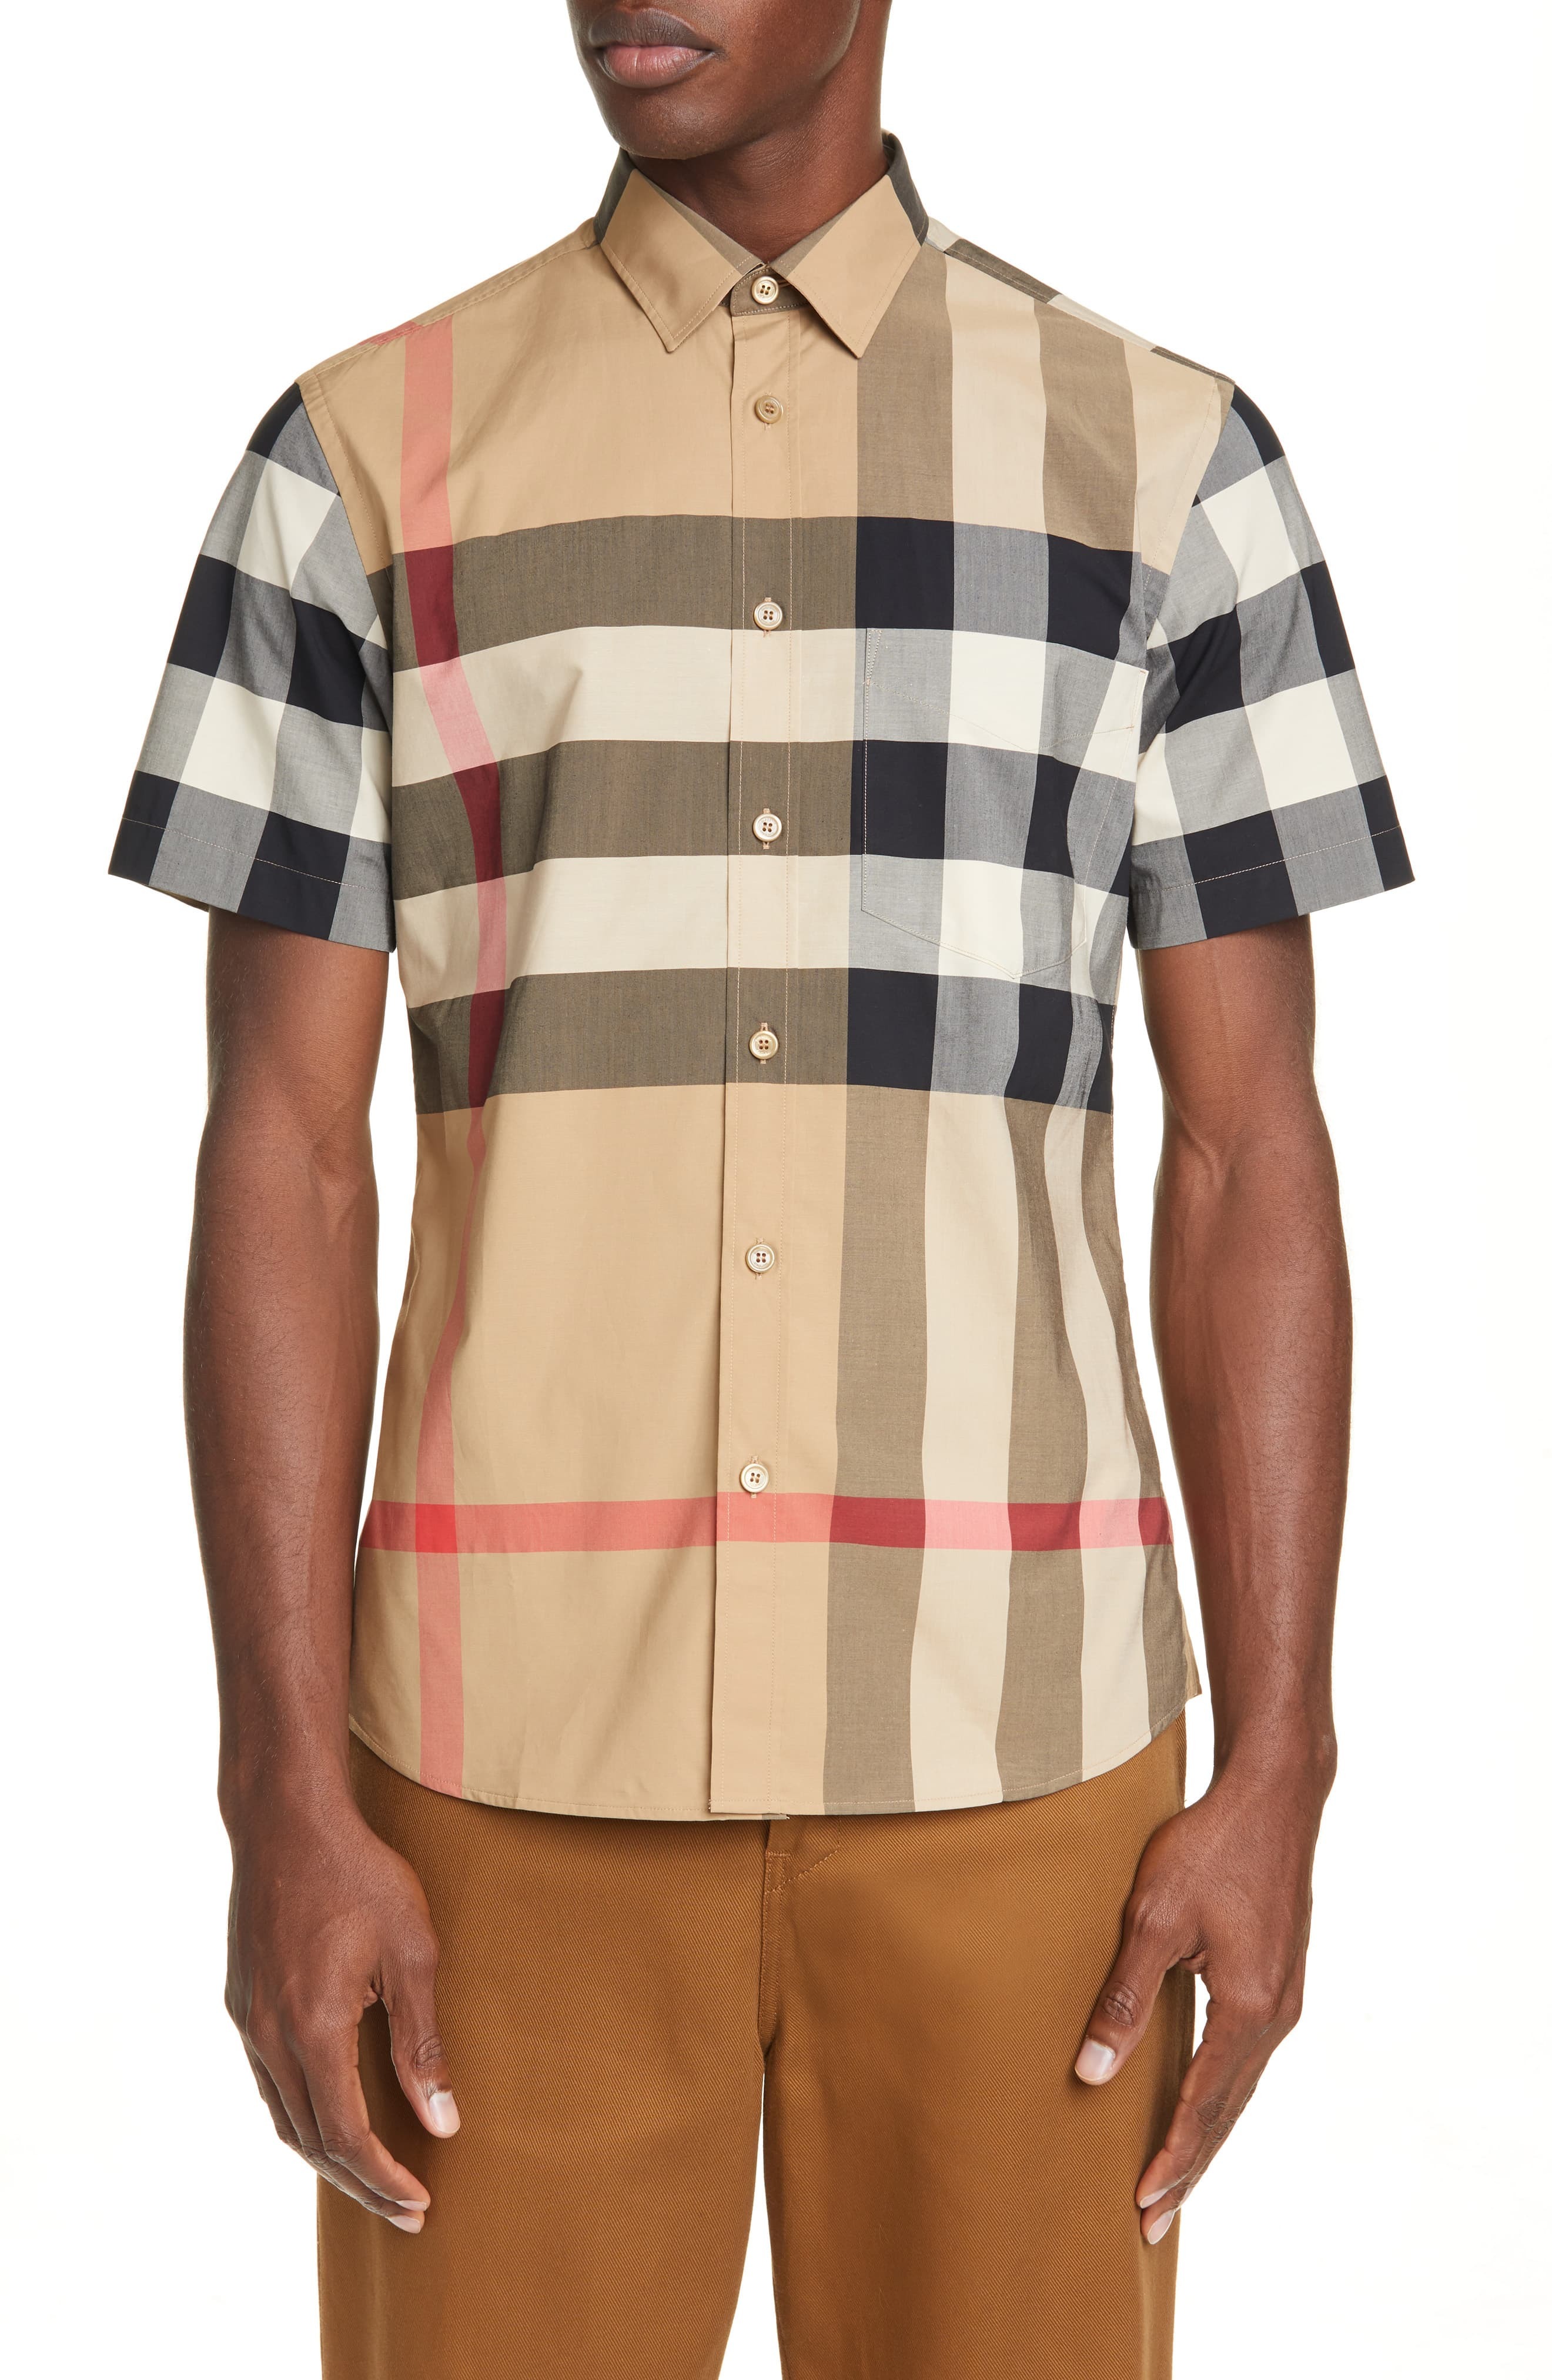 Burberry Somerton Plaid Button Up Shirt, $650 | Nordstrom | Lookastic